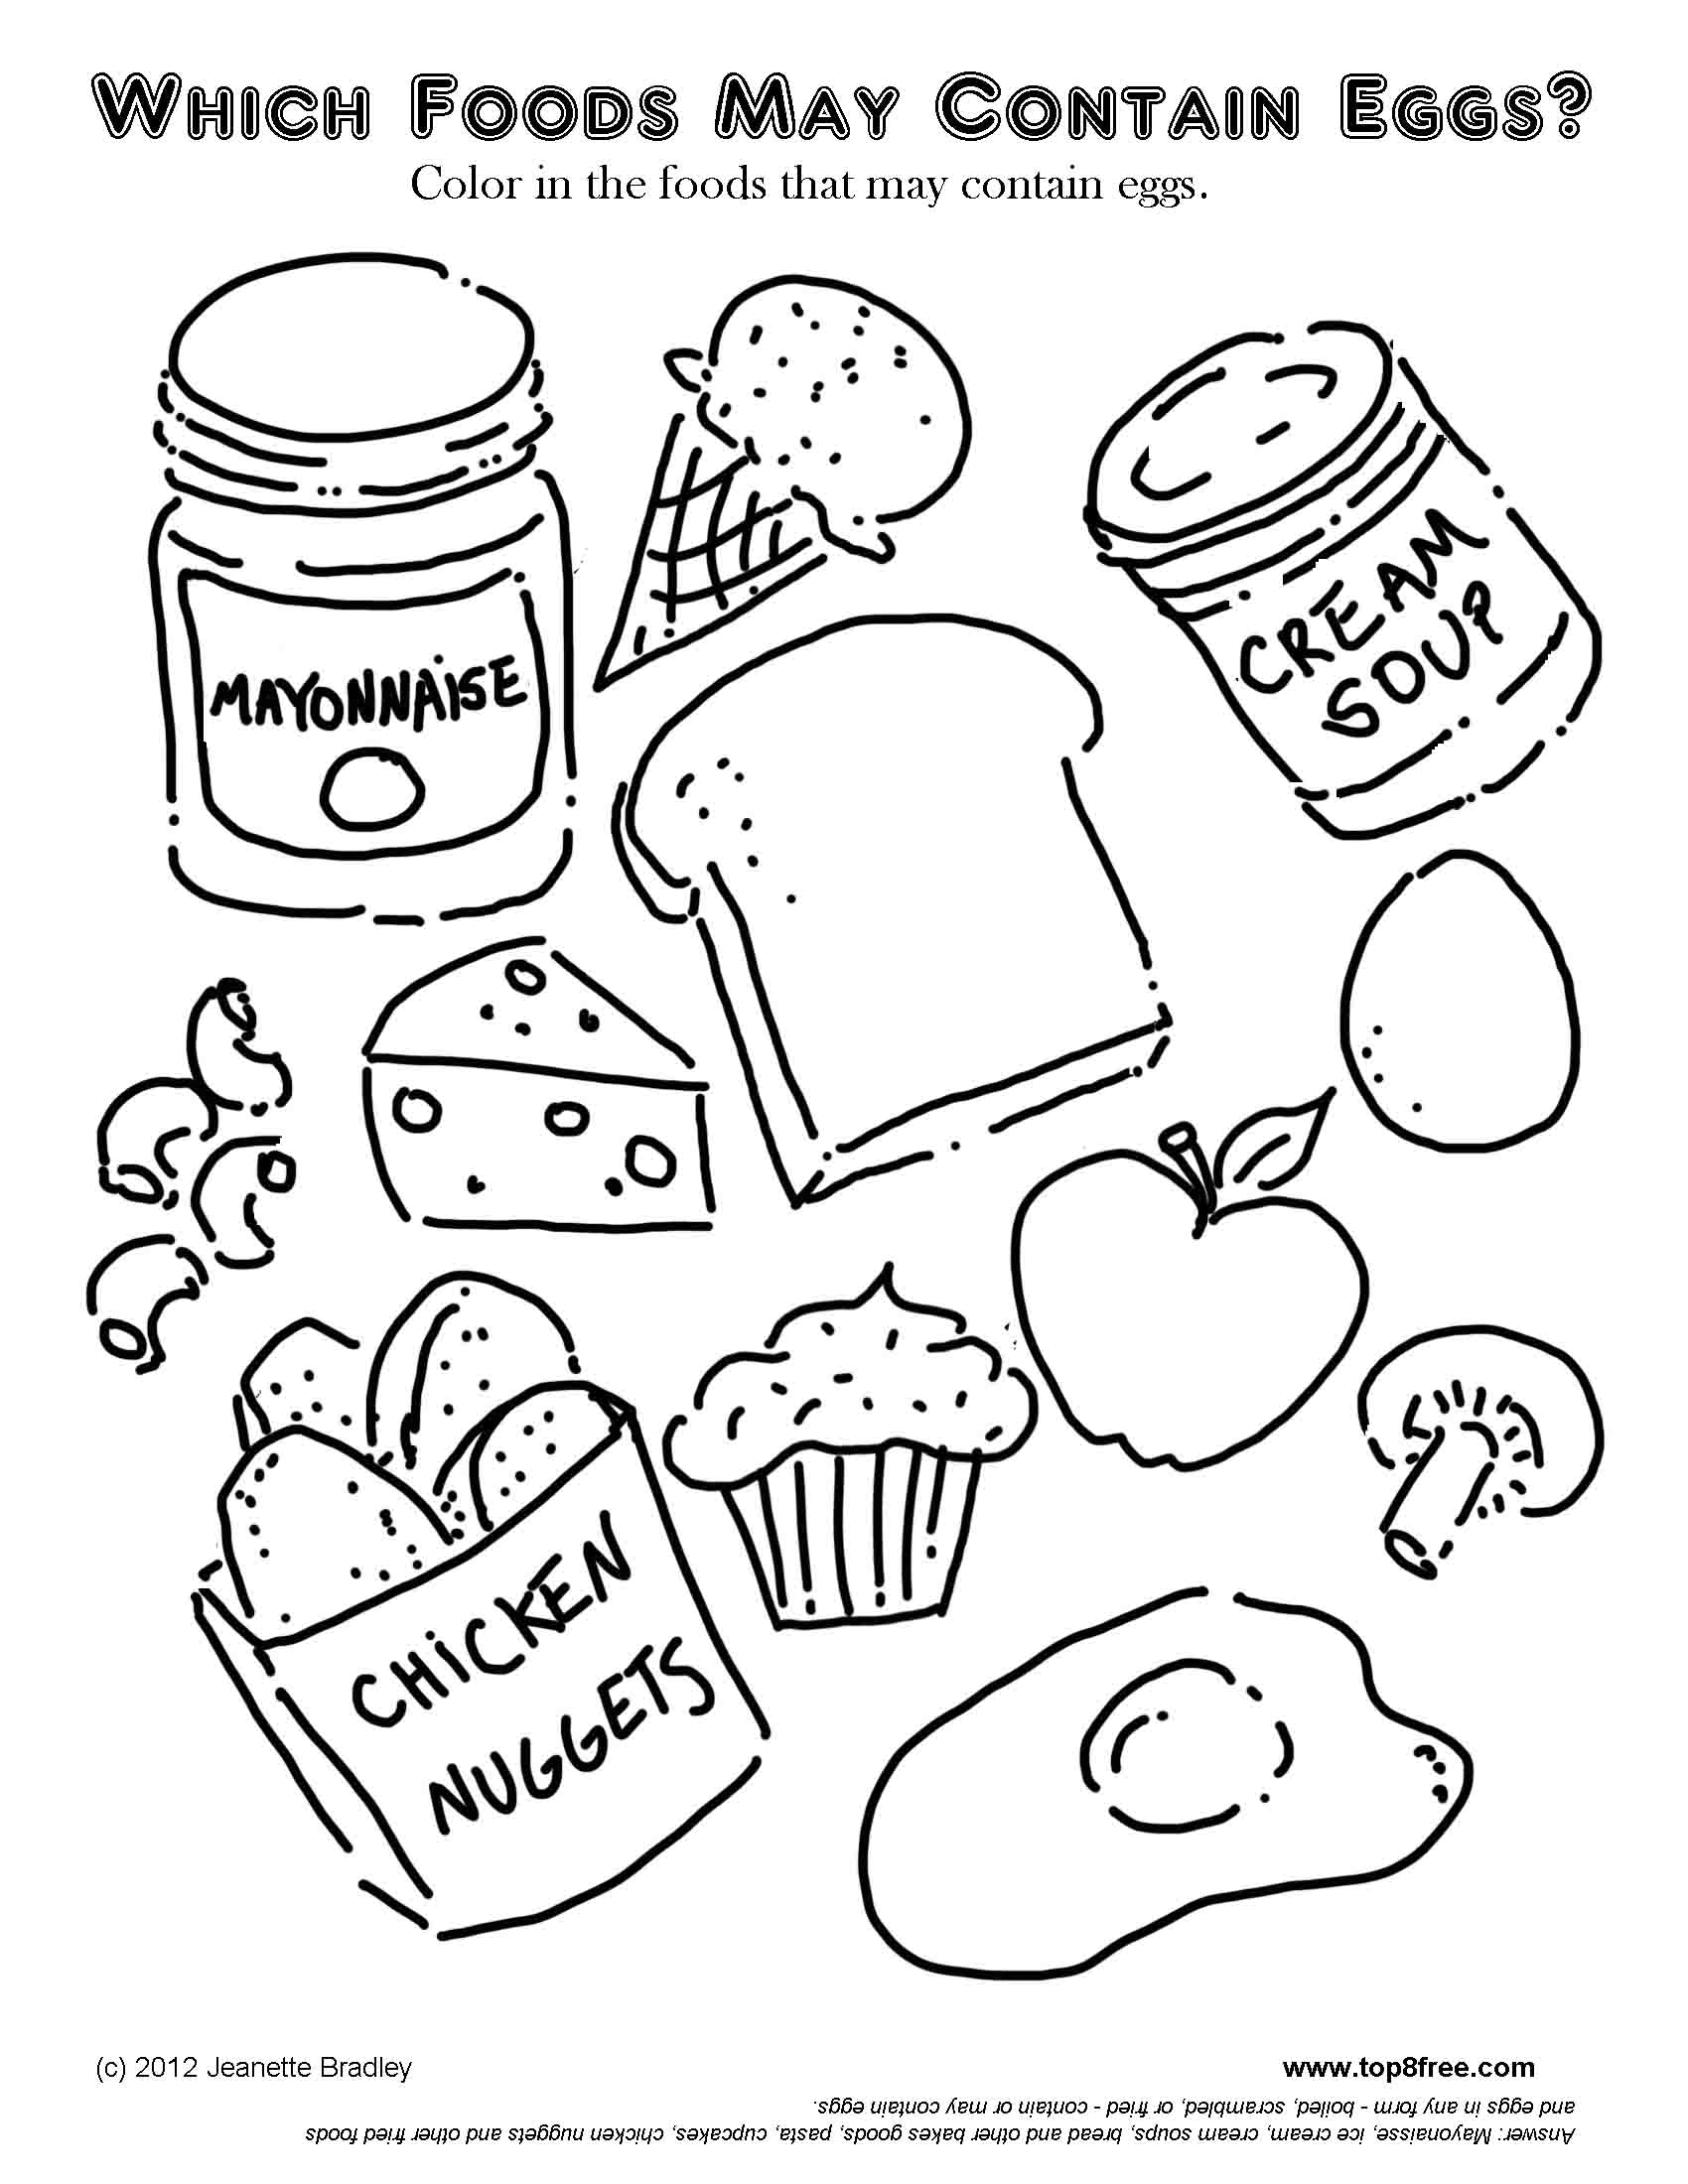 Food containing eggs worksheet - Free Nutrition Coloring Page